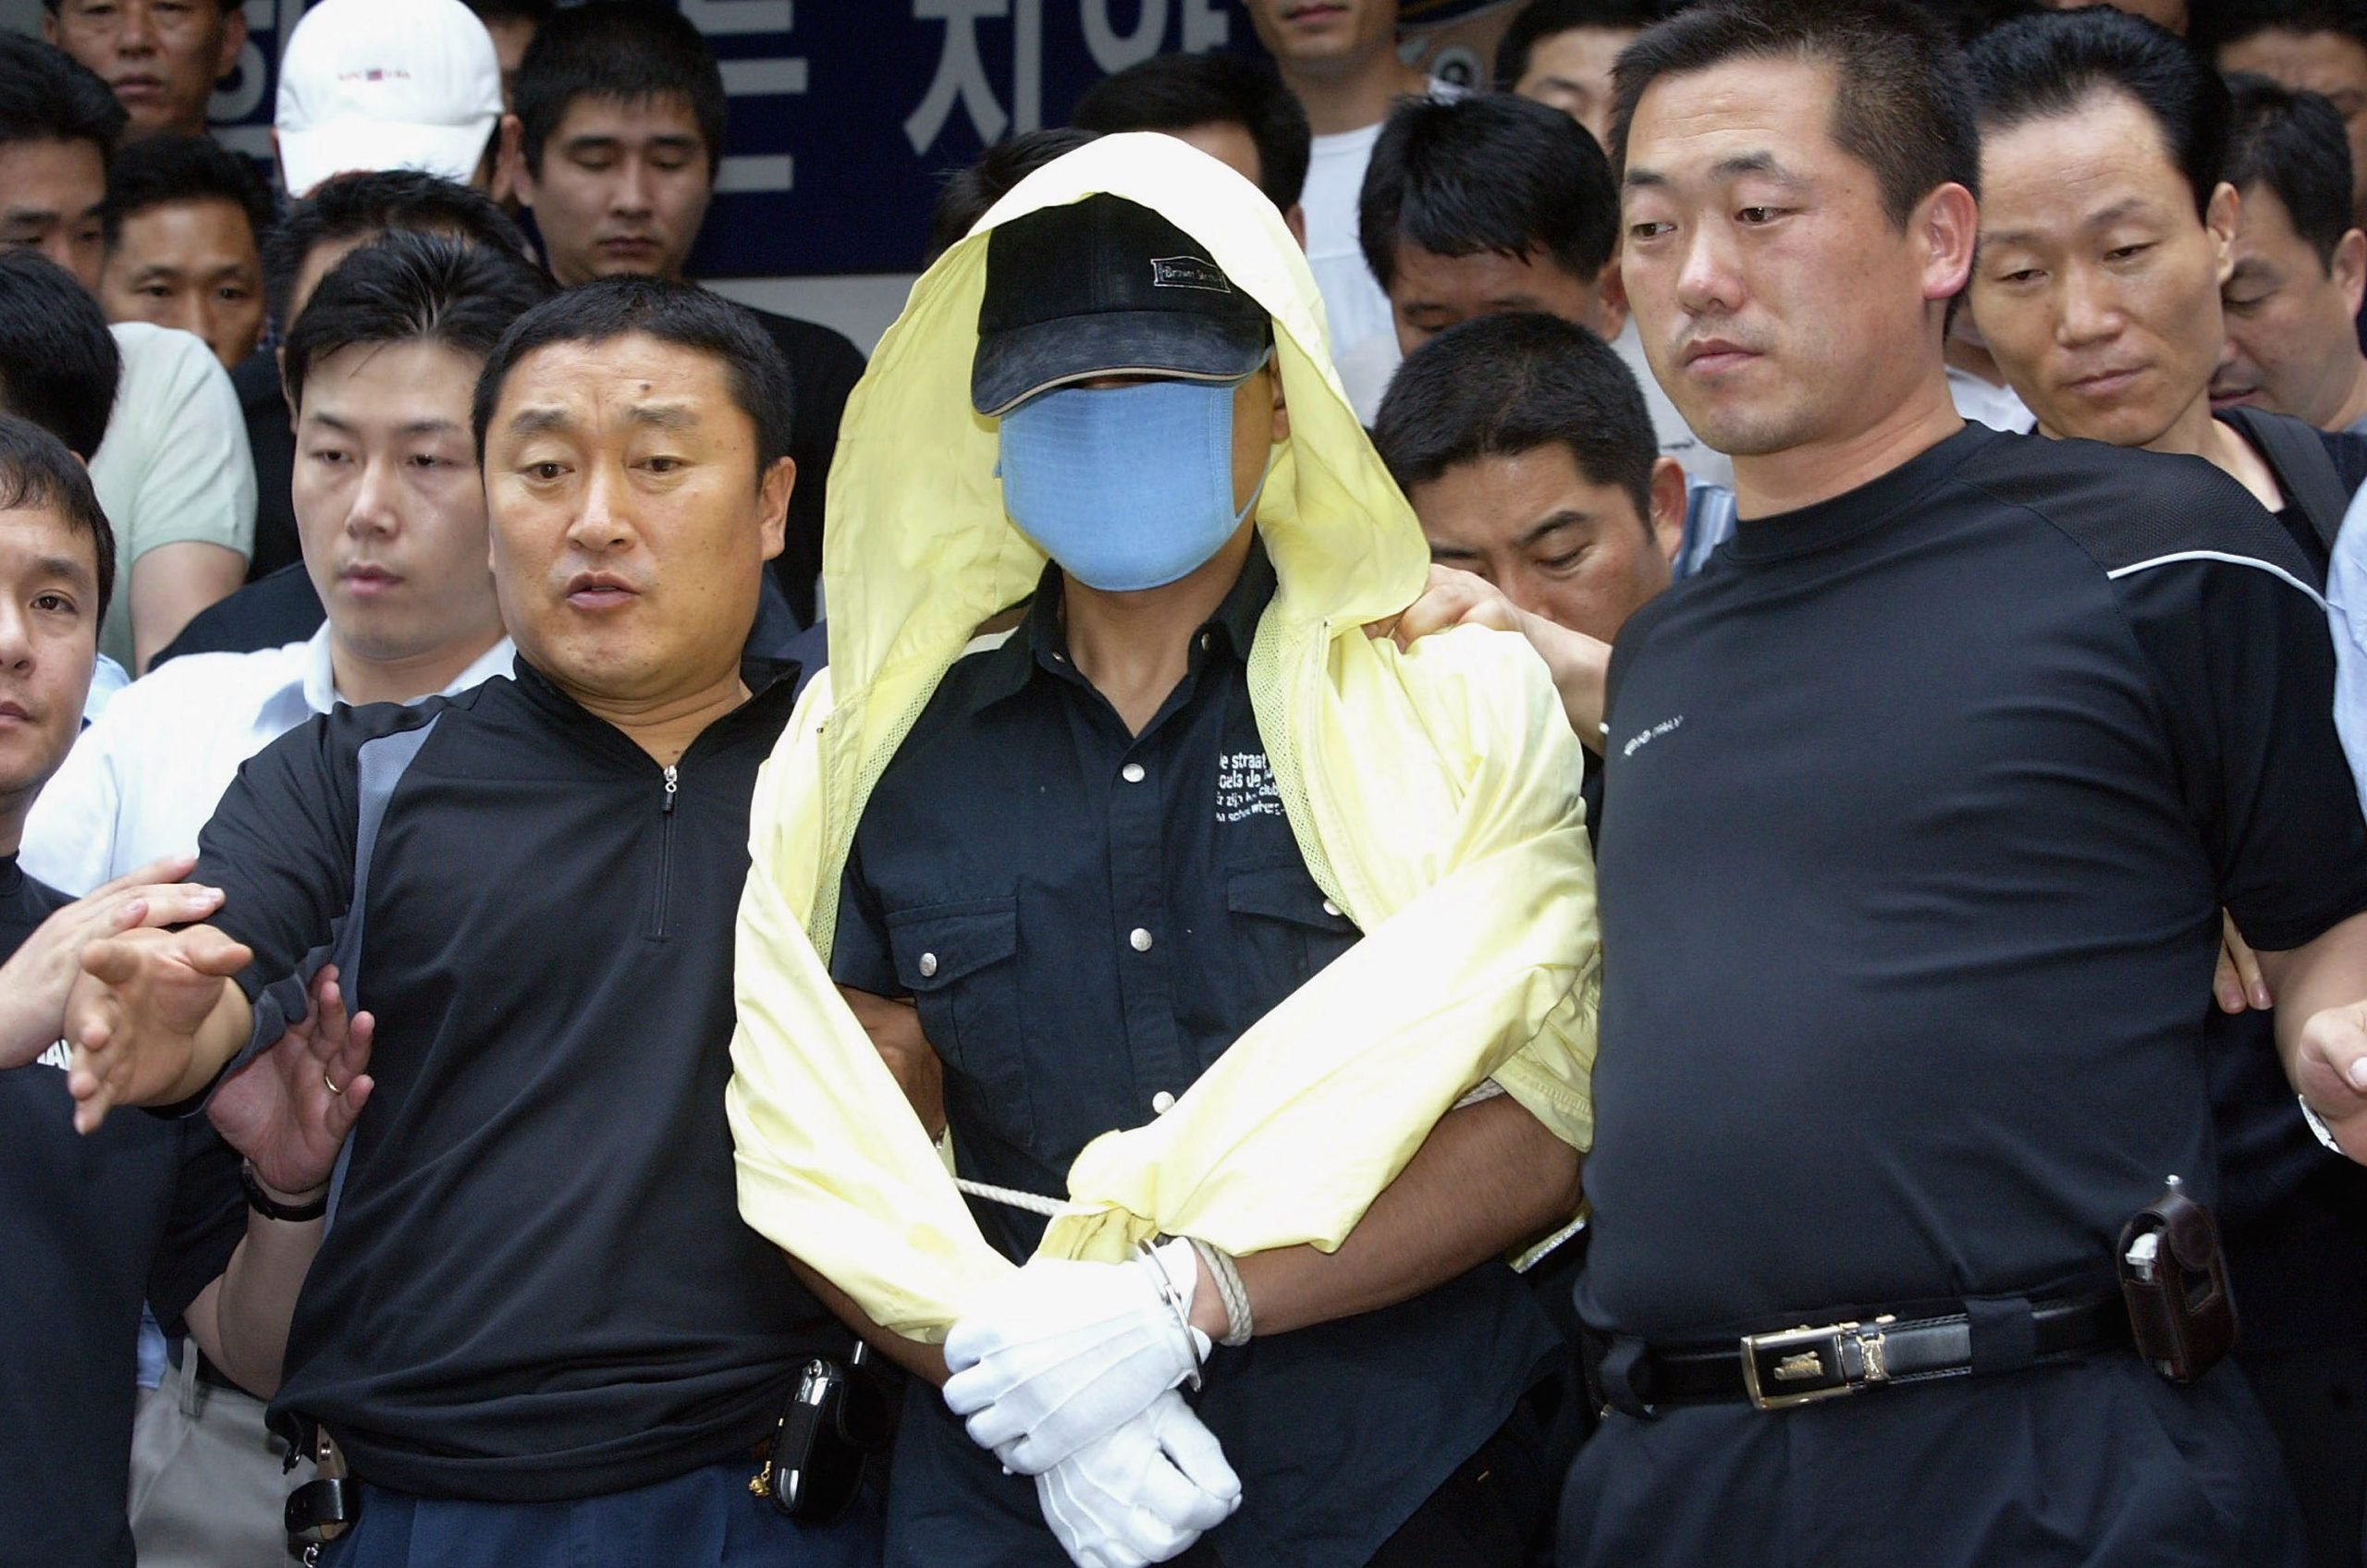 The Raincoat Killer Does Not Explain Yoo Young Chuls Backstory And Why His Face Was Never 